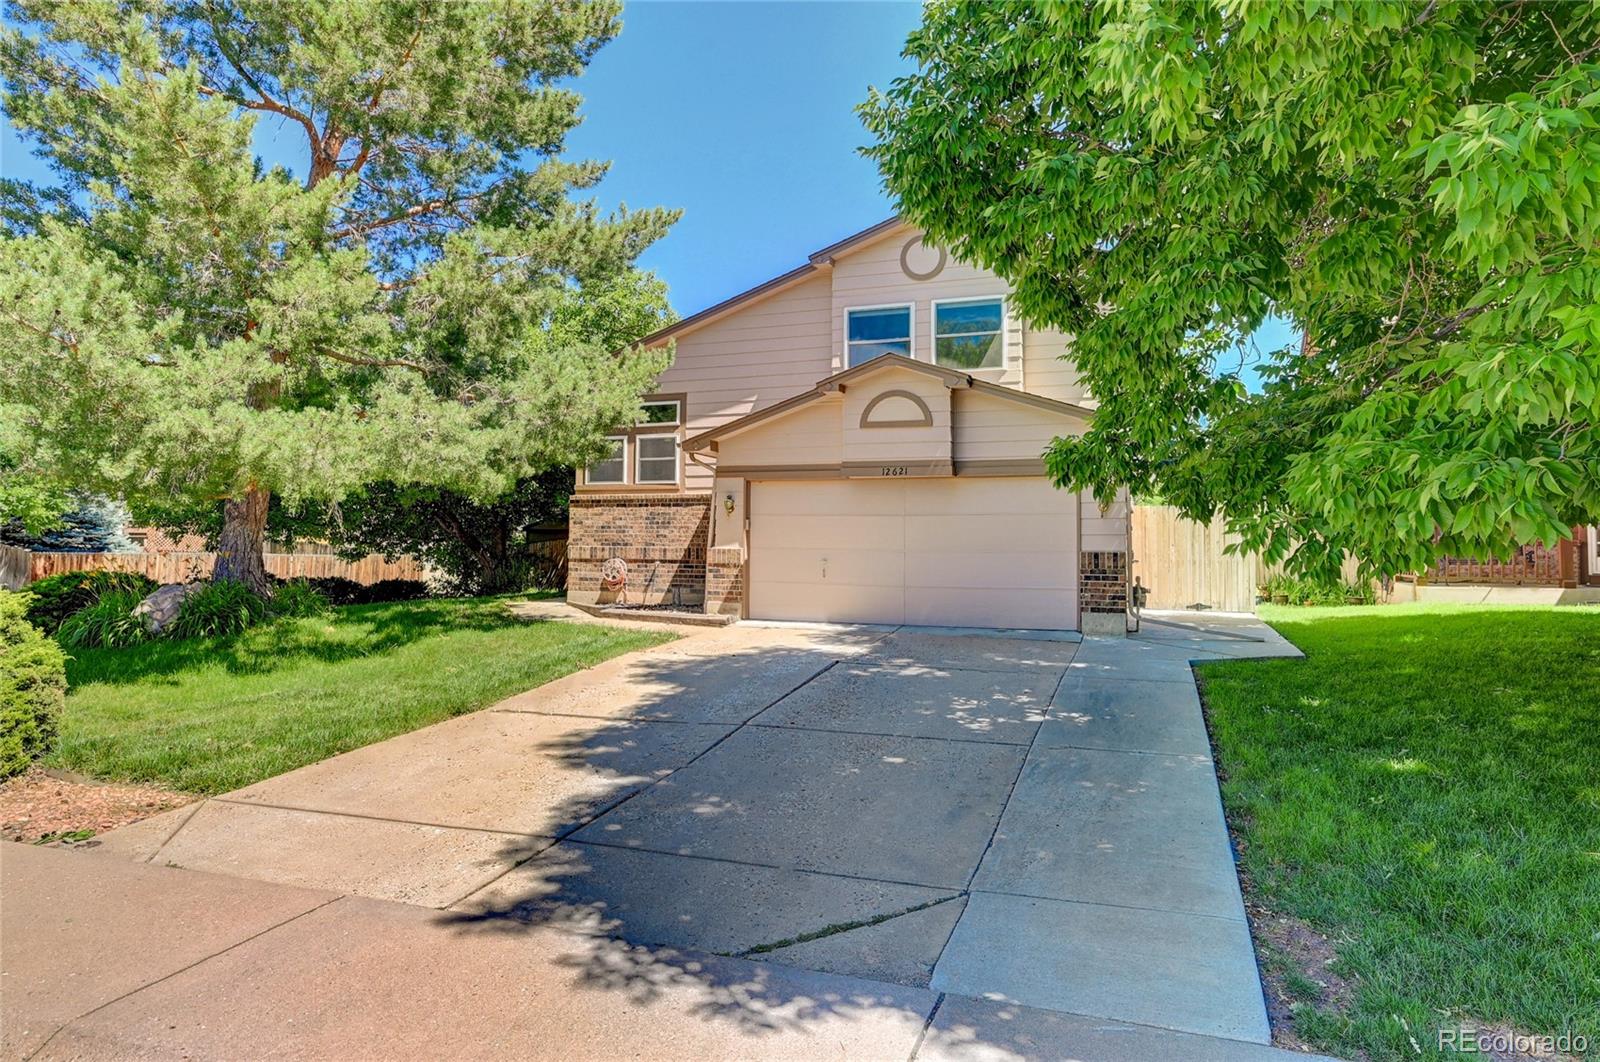 12621 w brandt drive, littleton sold home. Closed on 2024-06-03 for $657,000.